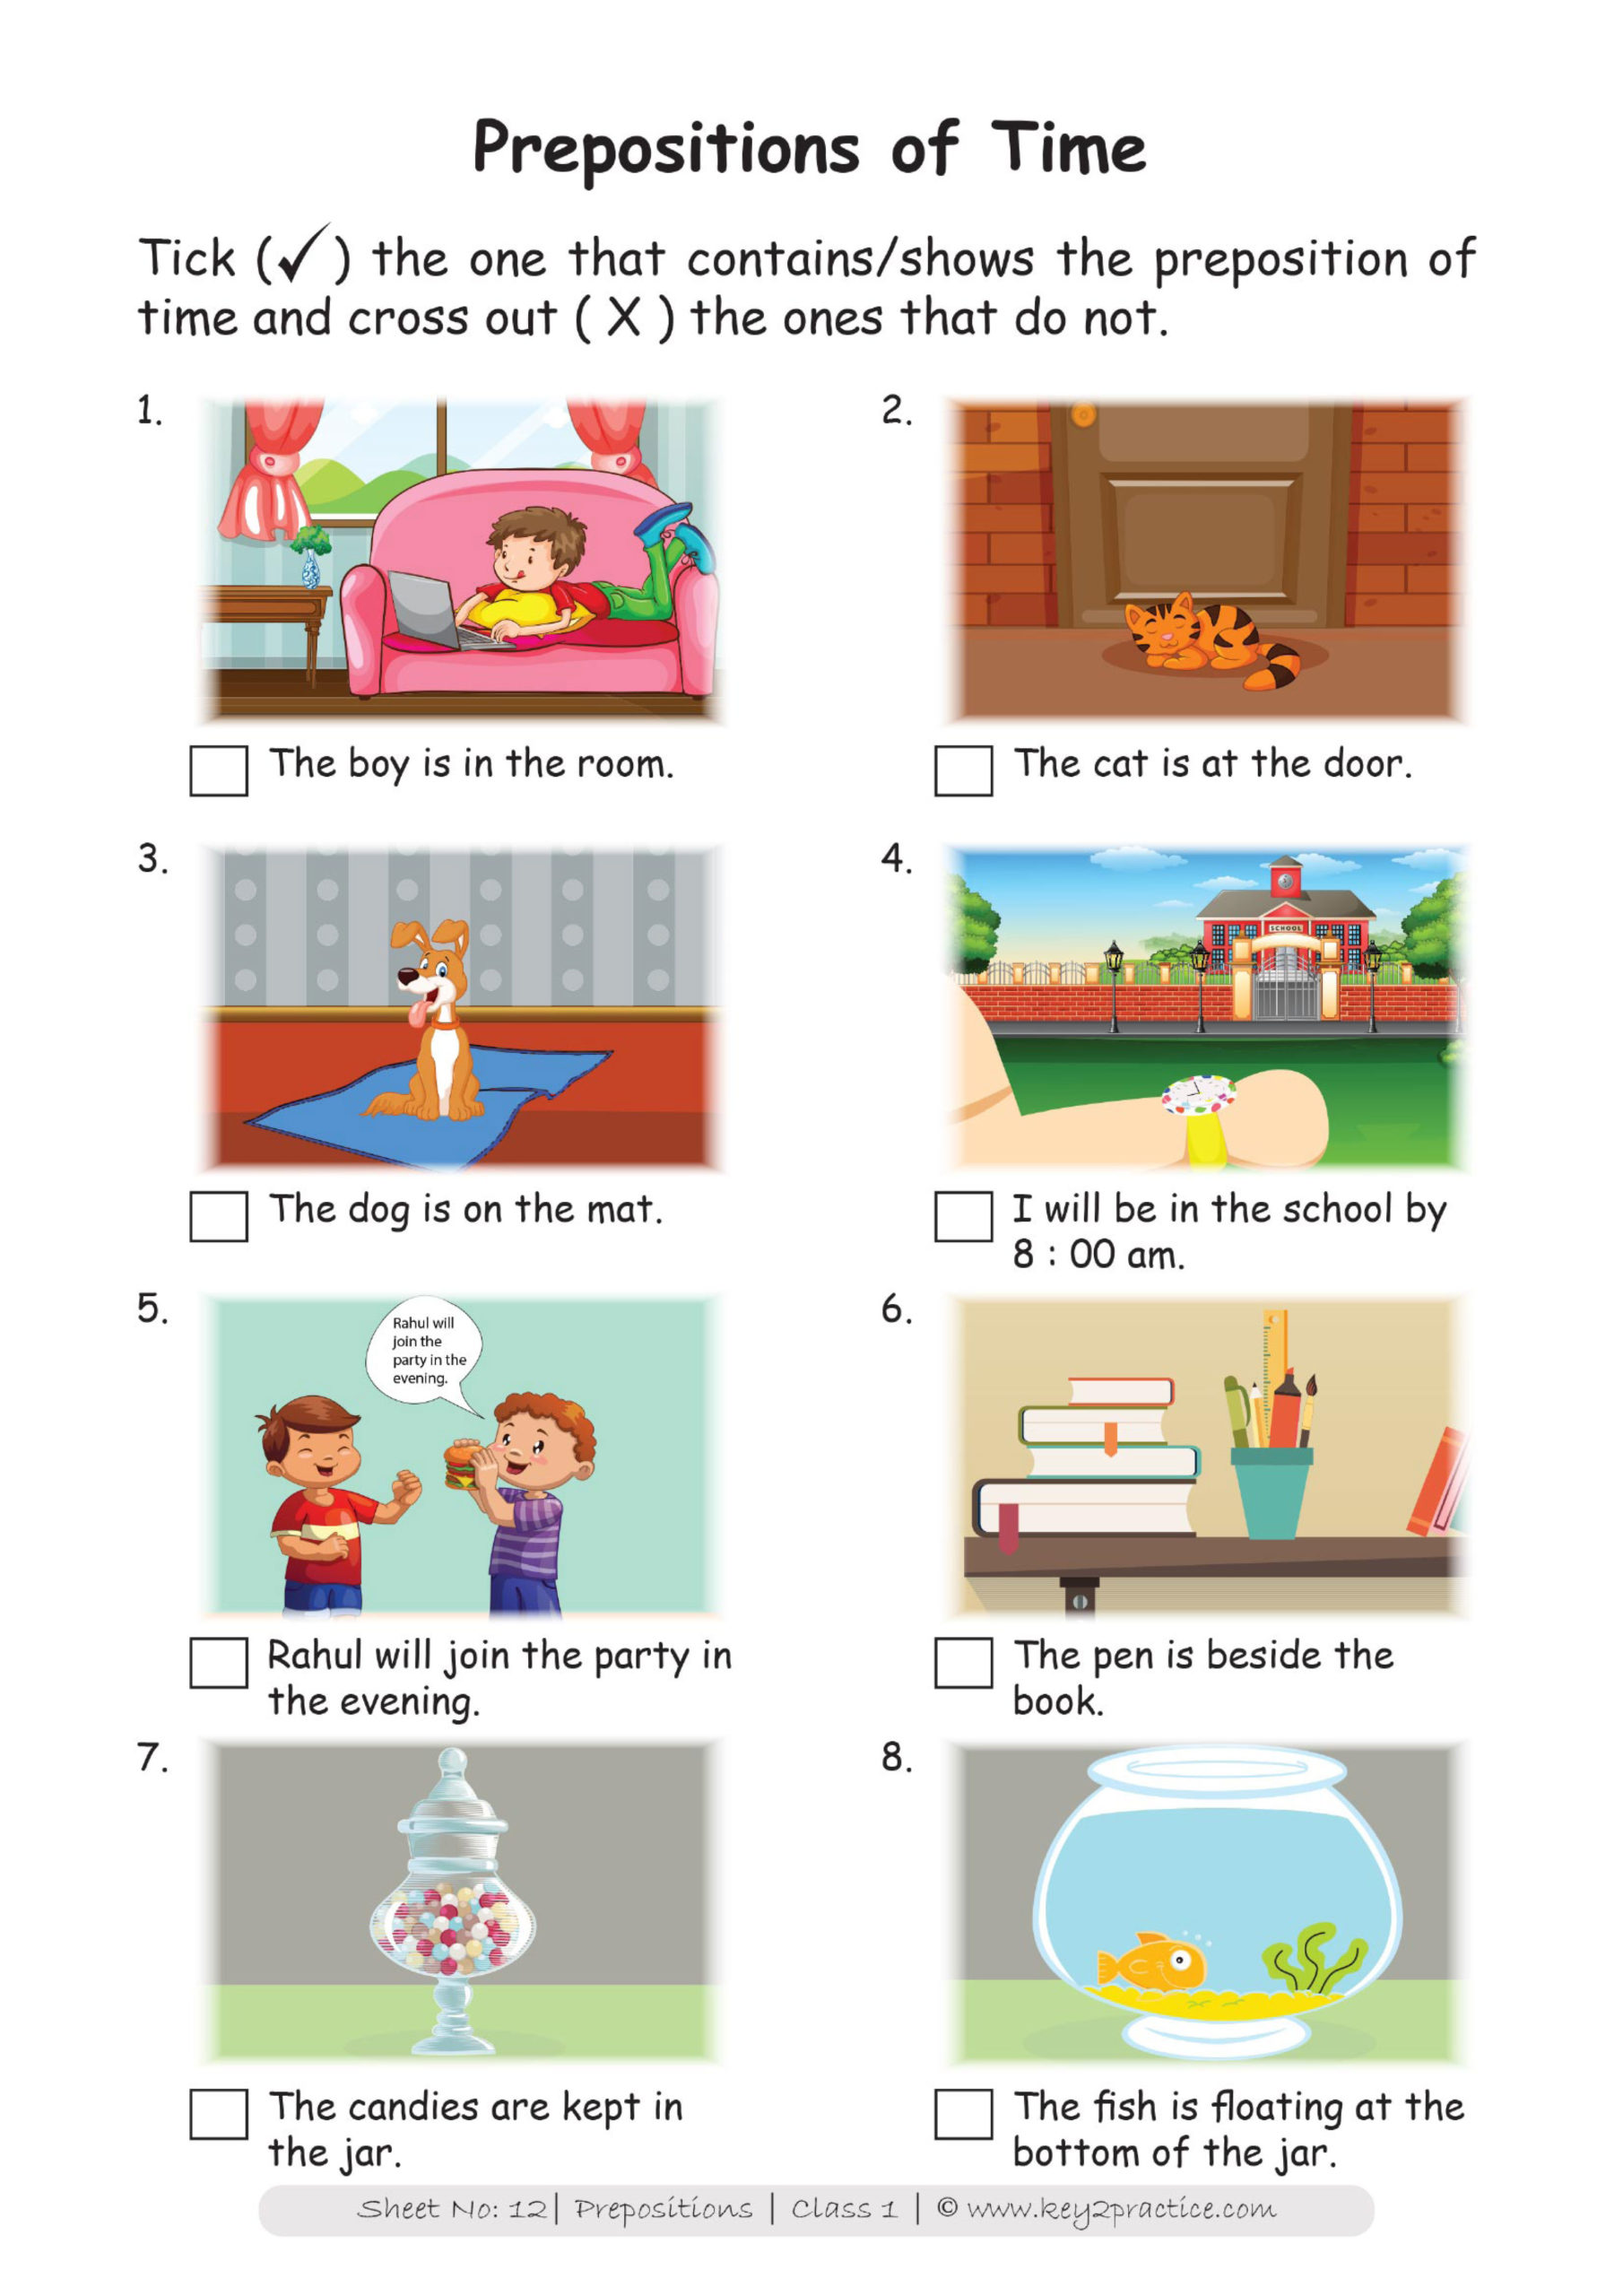 prepositions-of-time-and-place-in-on-at-prepositional-phrases